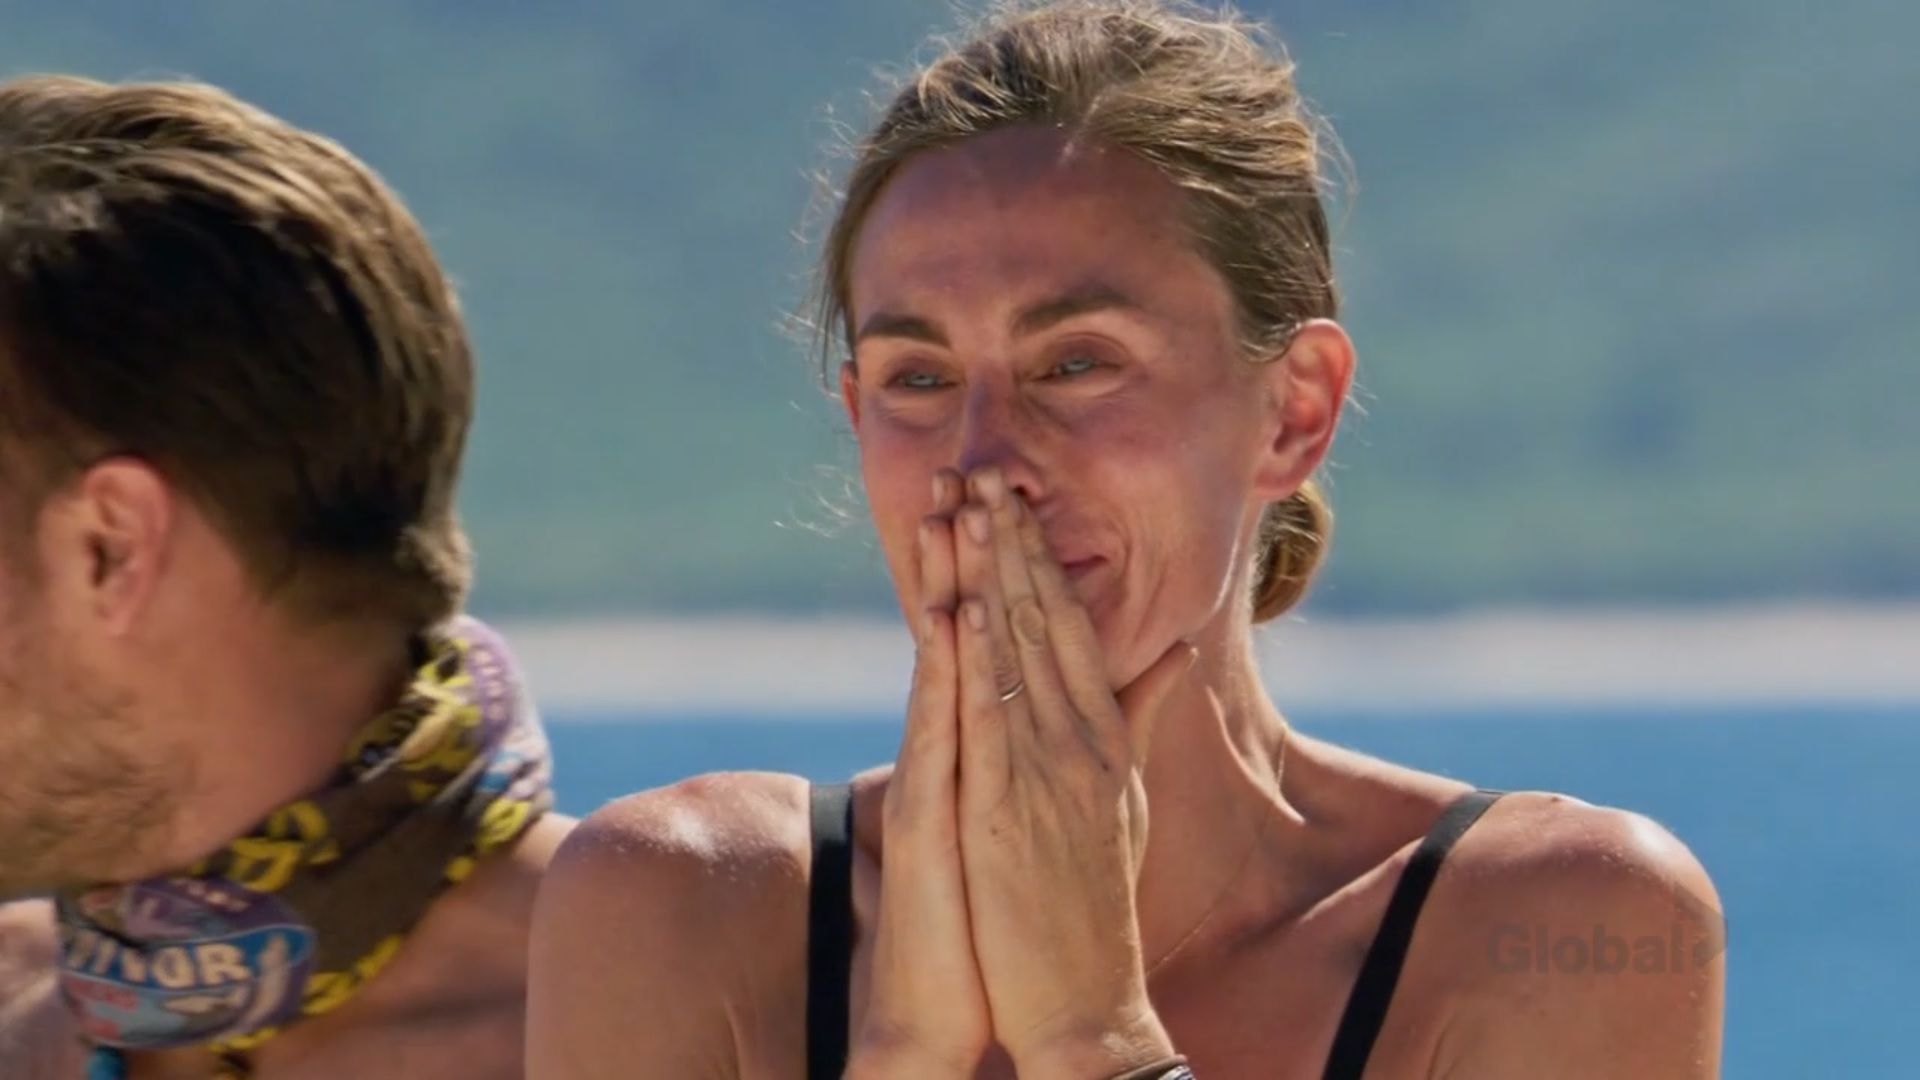 Kim crying when the loved ones arrive on Survivor: Winners at War